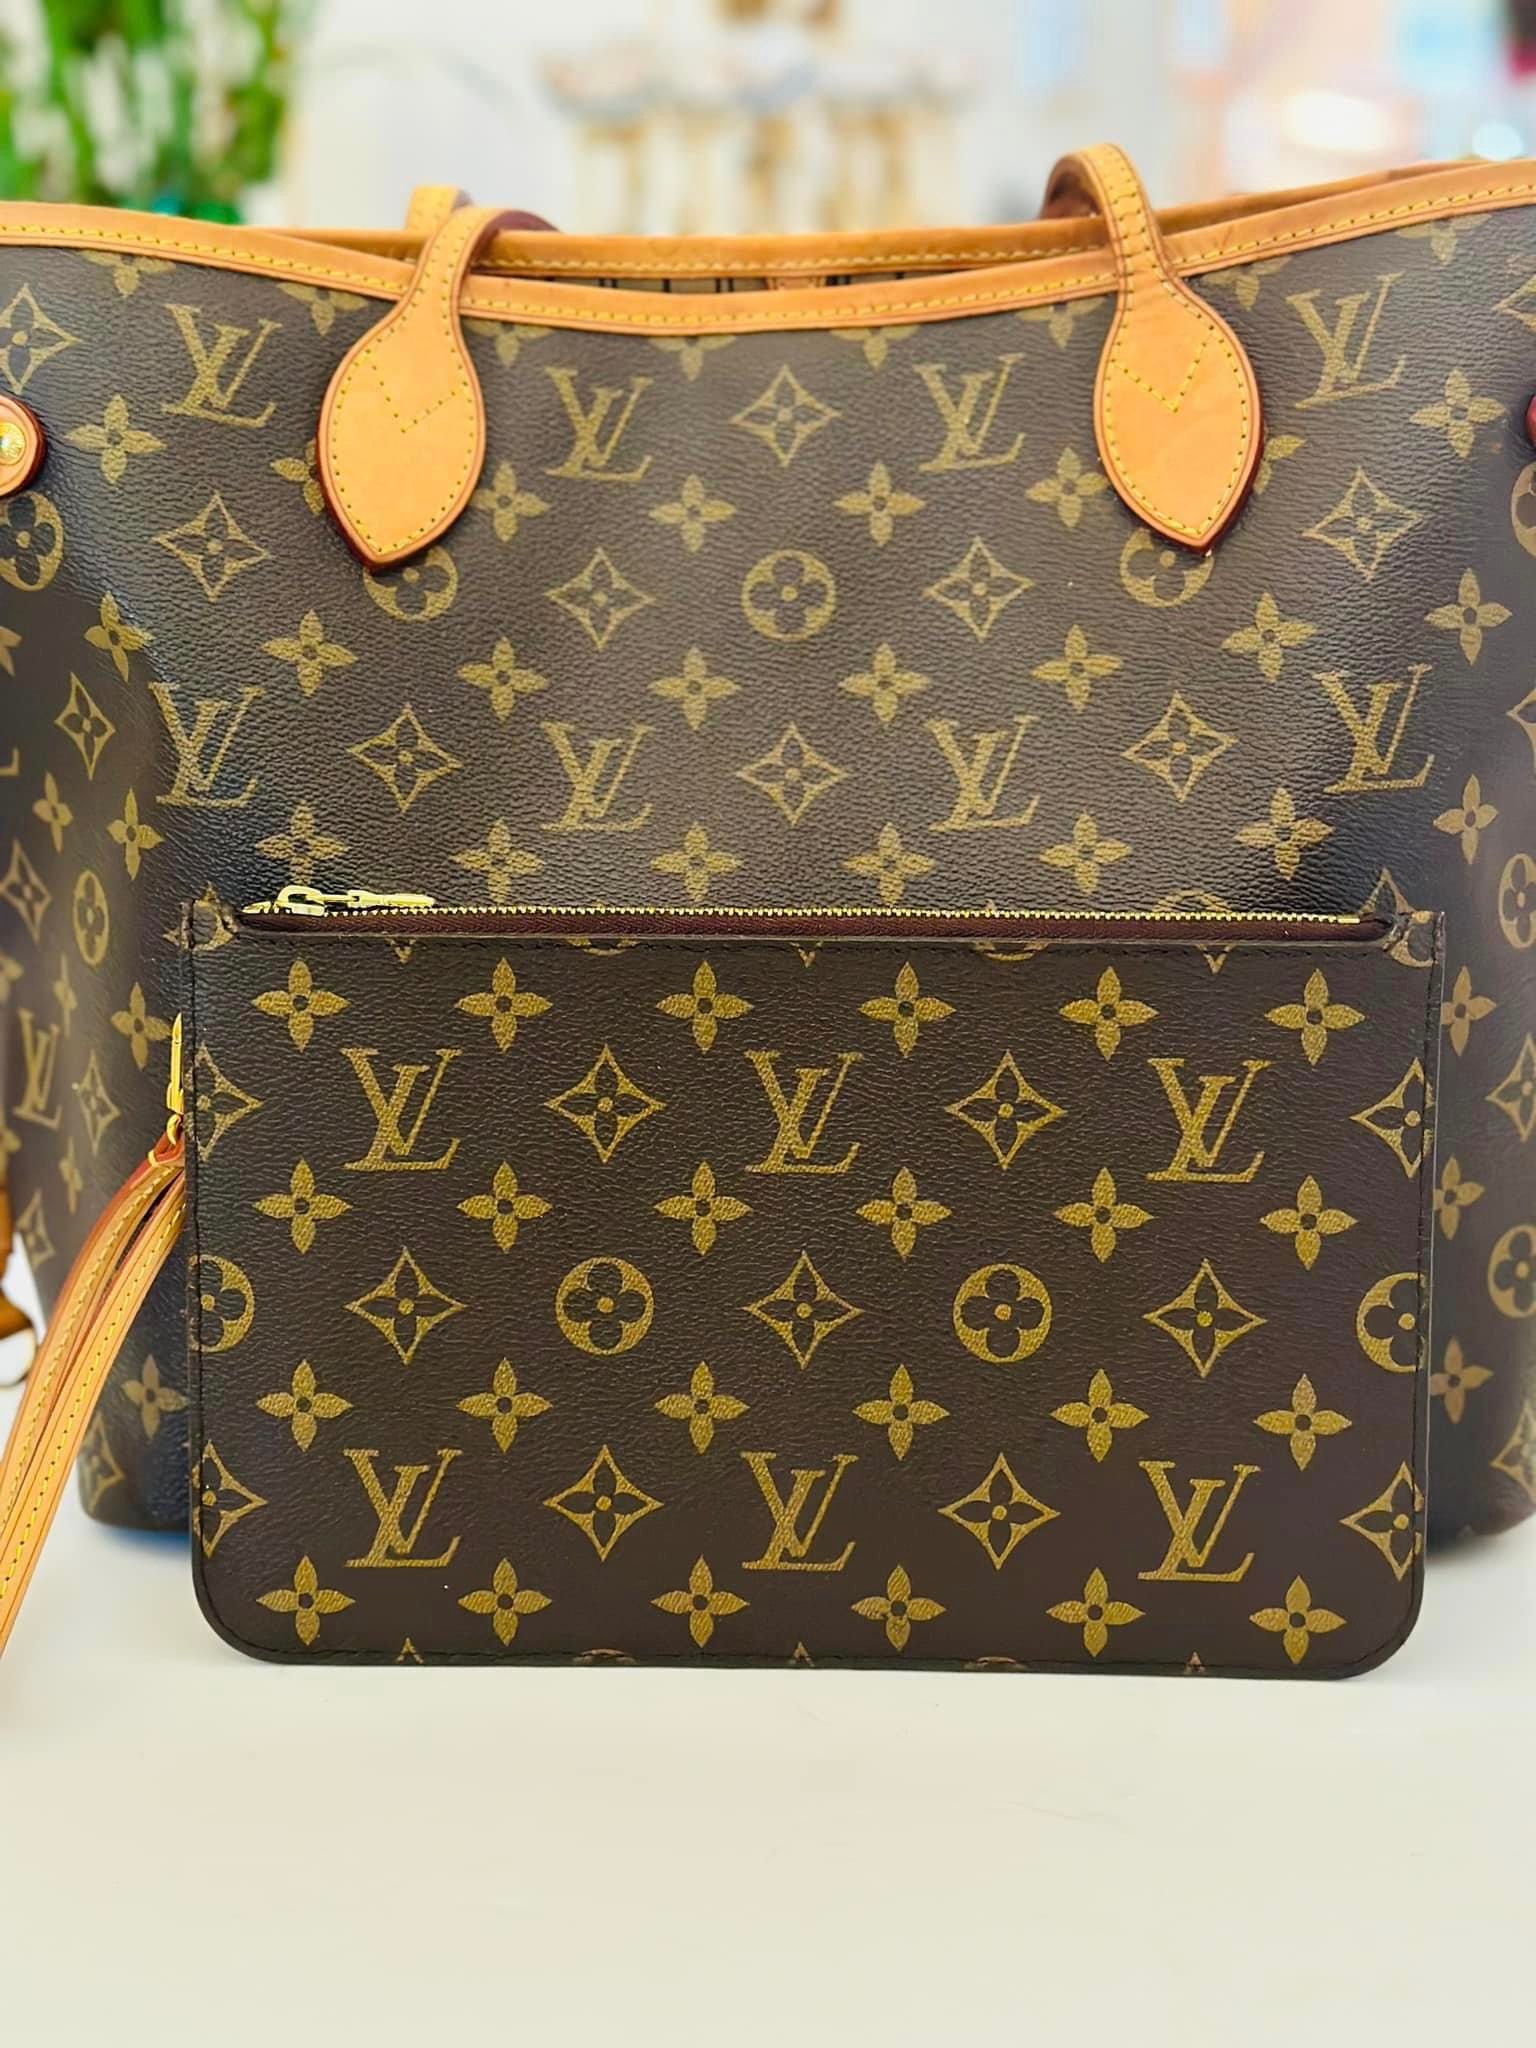 Beautiful Authentic Louis Vuitton Neverfull MM Tote with Pouch for